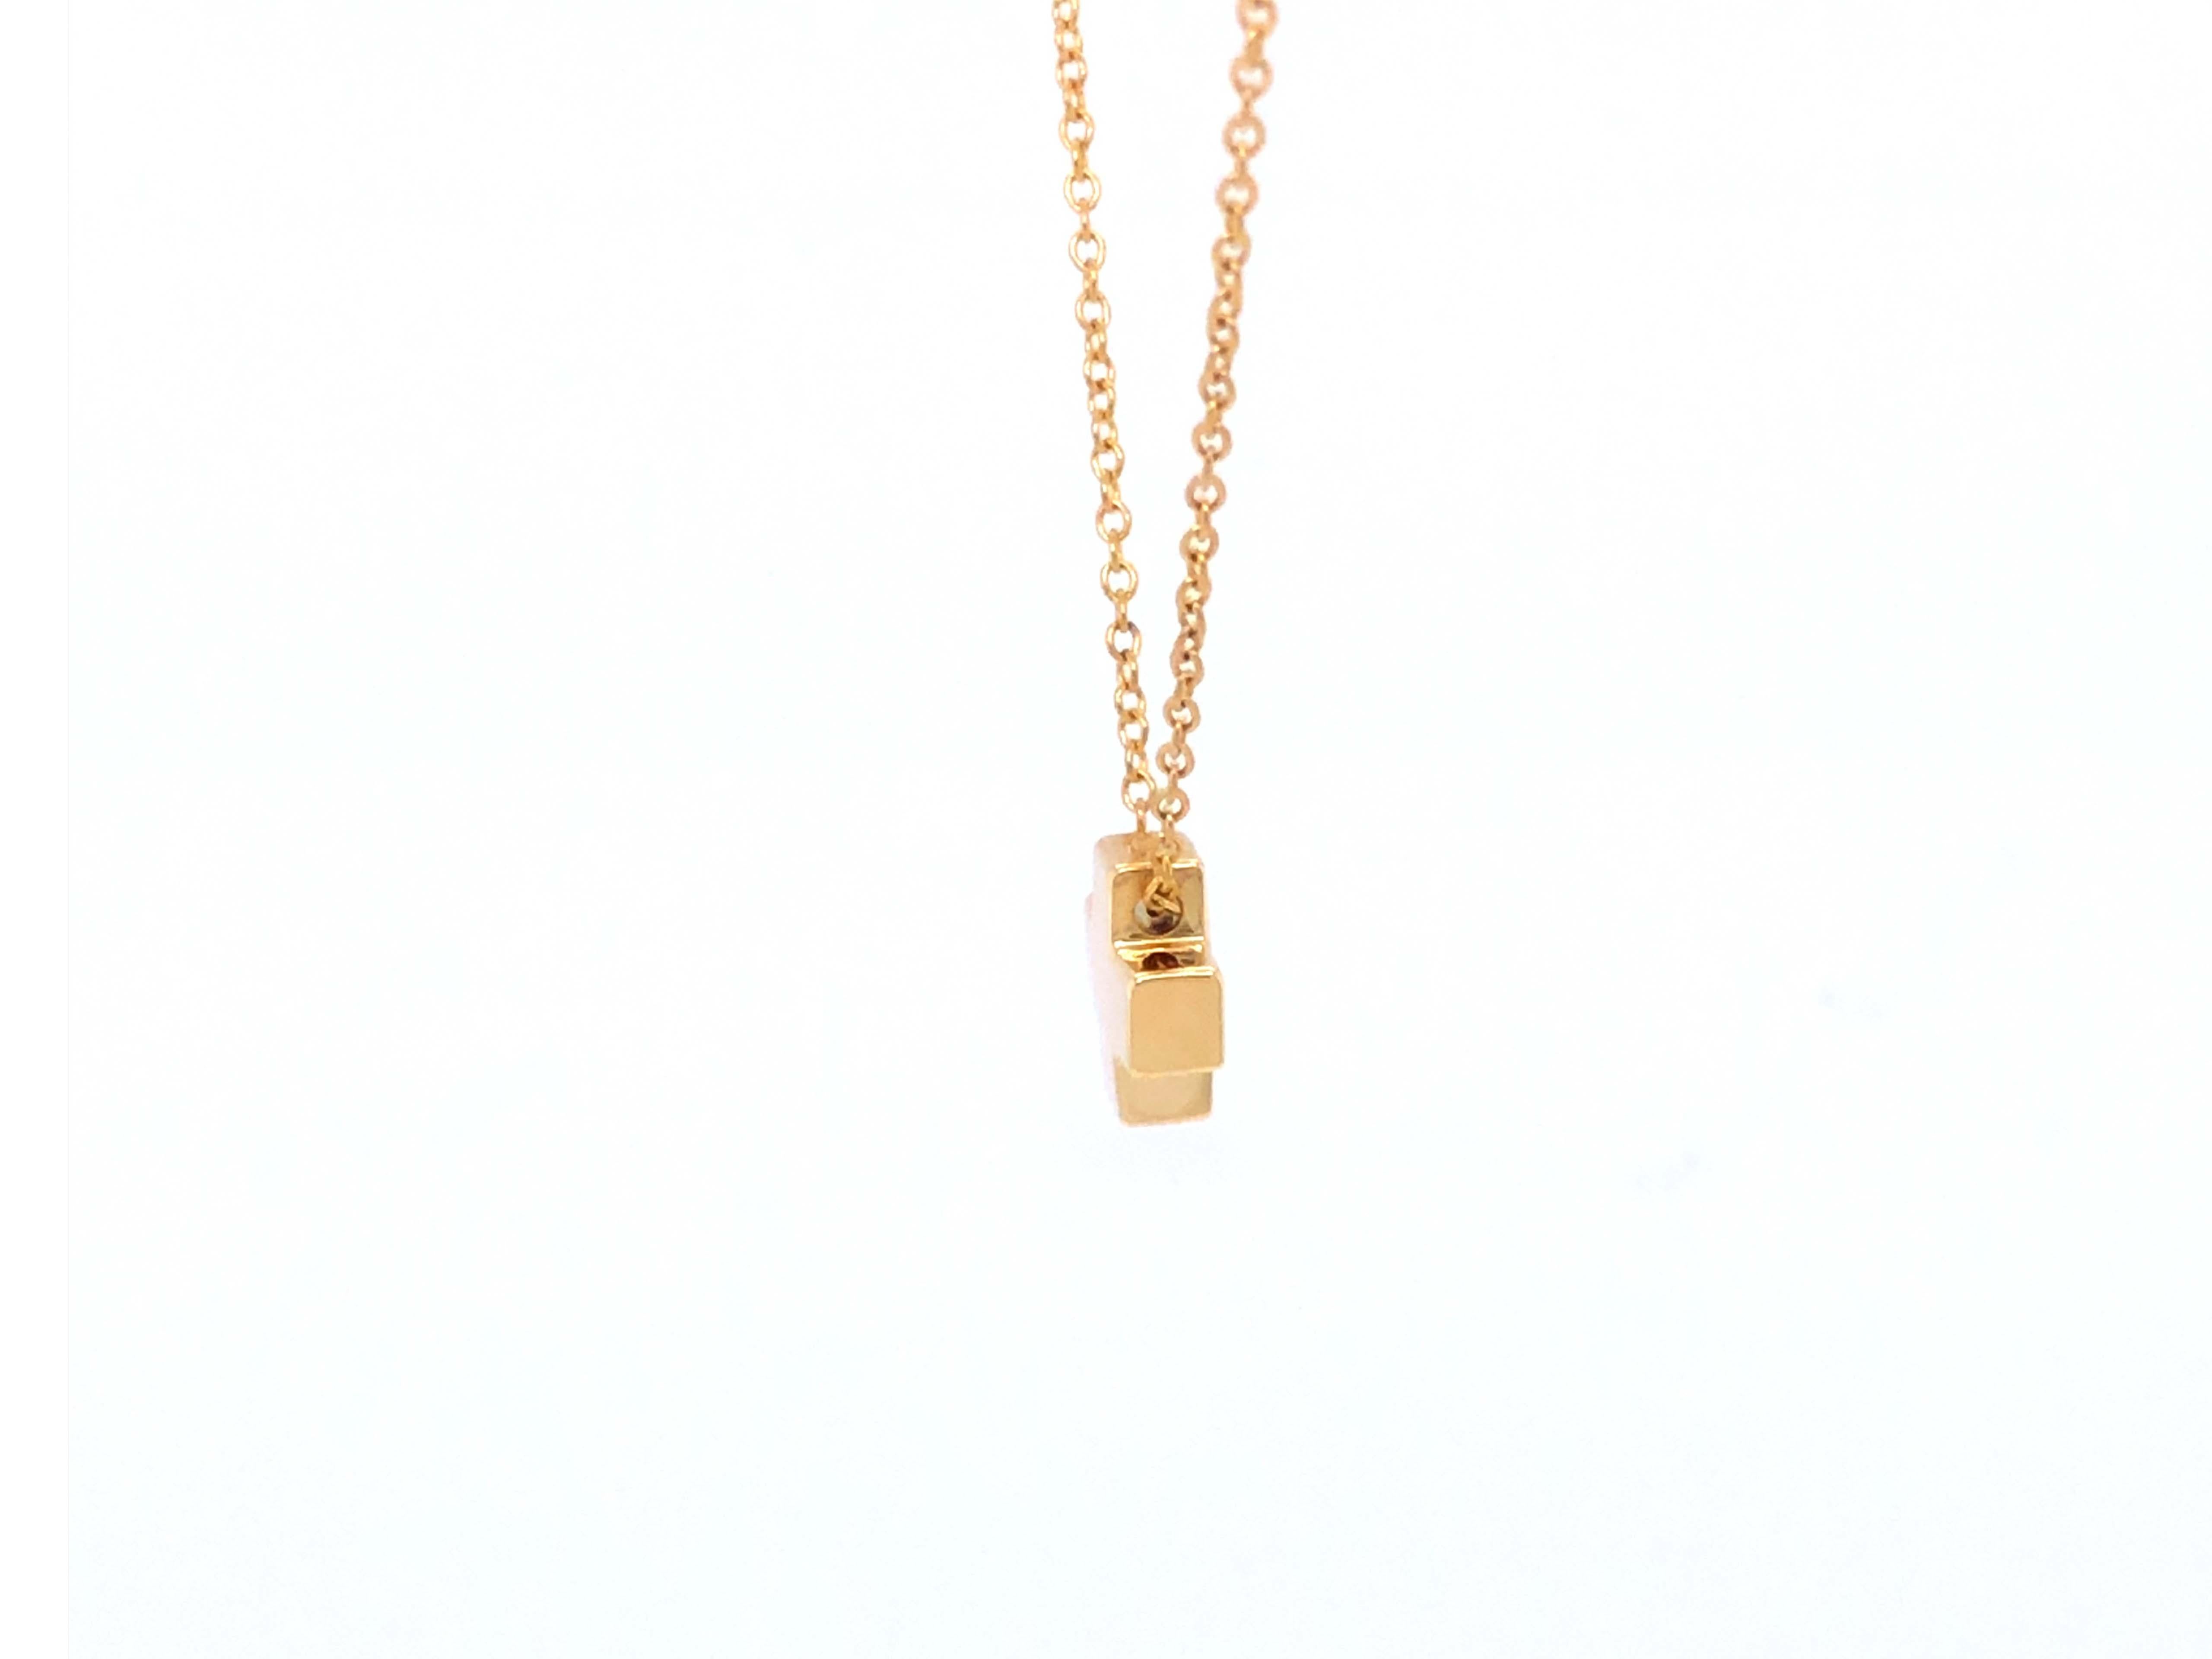 Women's or Men's Tiffany & Co. Cross Pendant and Chain, 18k Yellow Gold